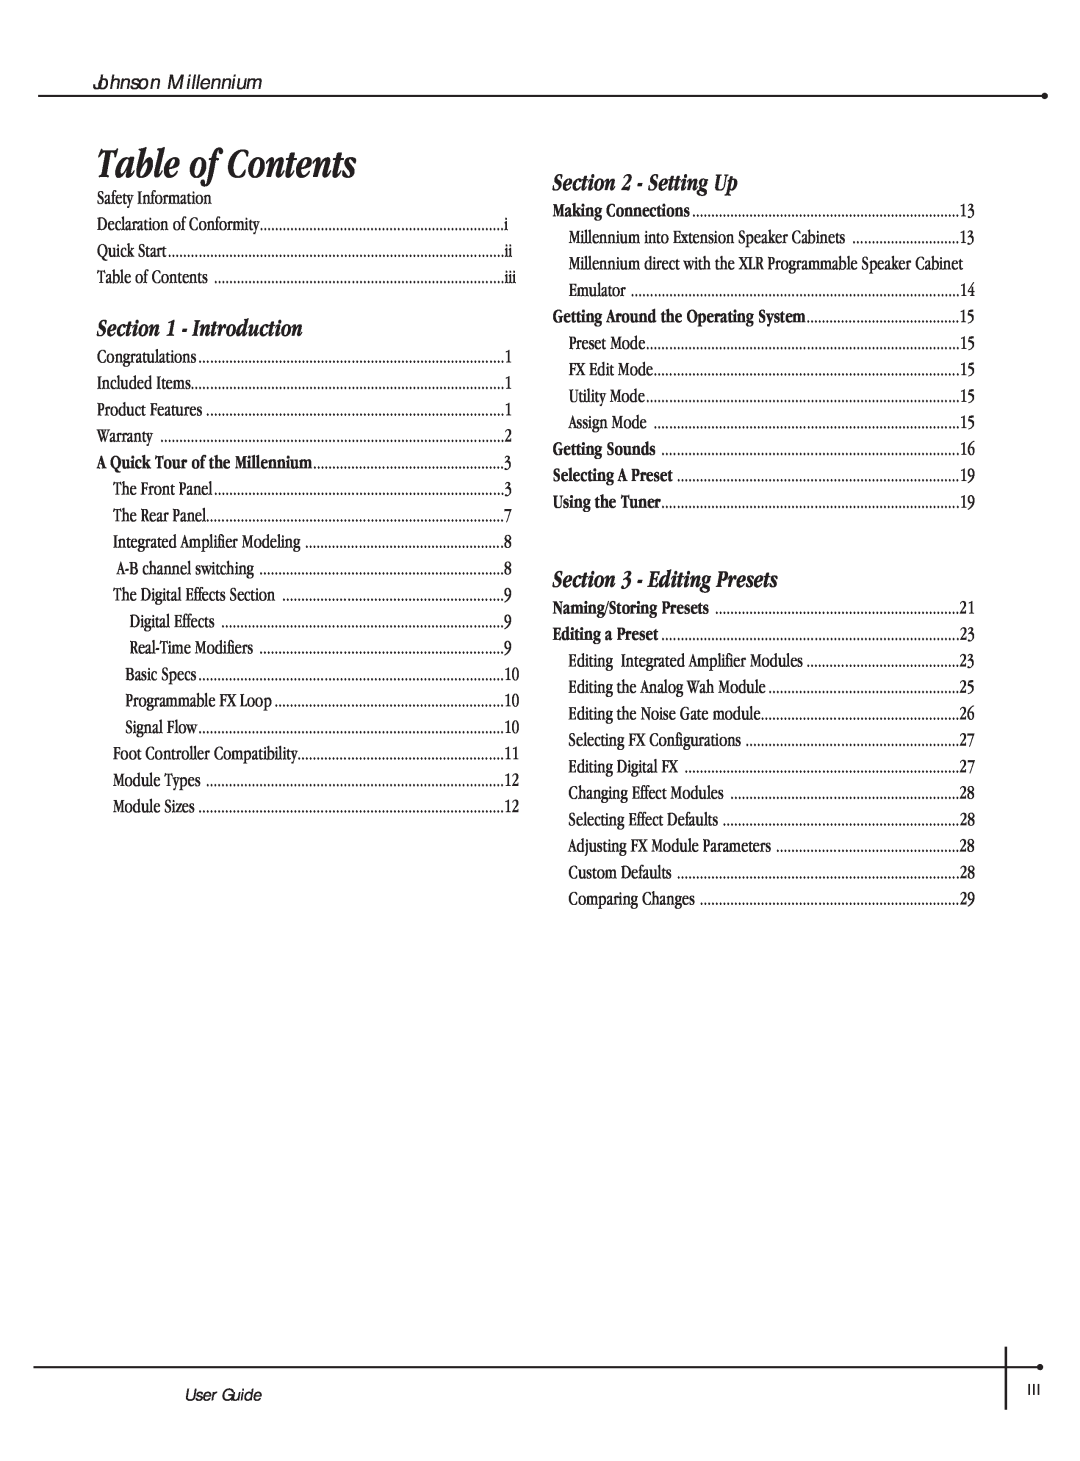 Millennium Enterprises Integrated Modeling Amplifier manual Table of Contents, Introduction, Setting Up, Editing Presets 